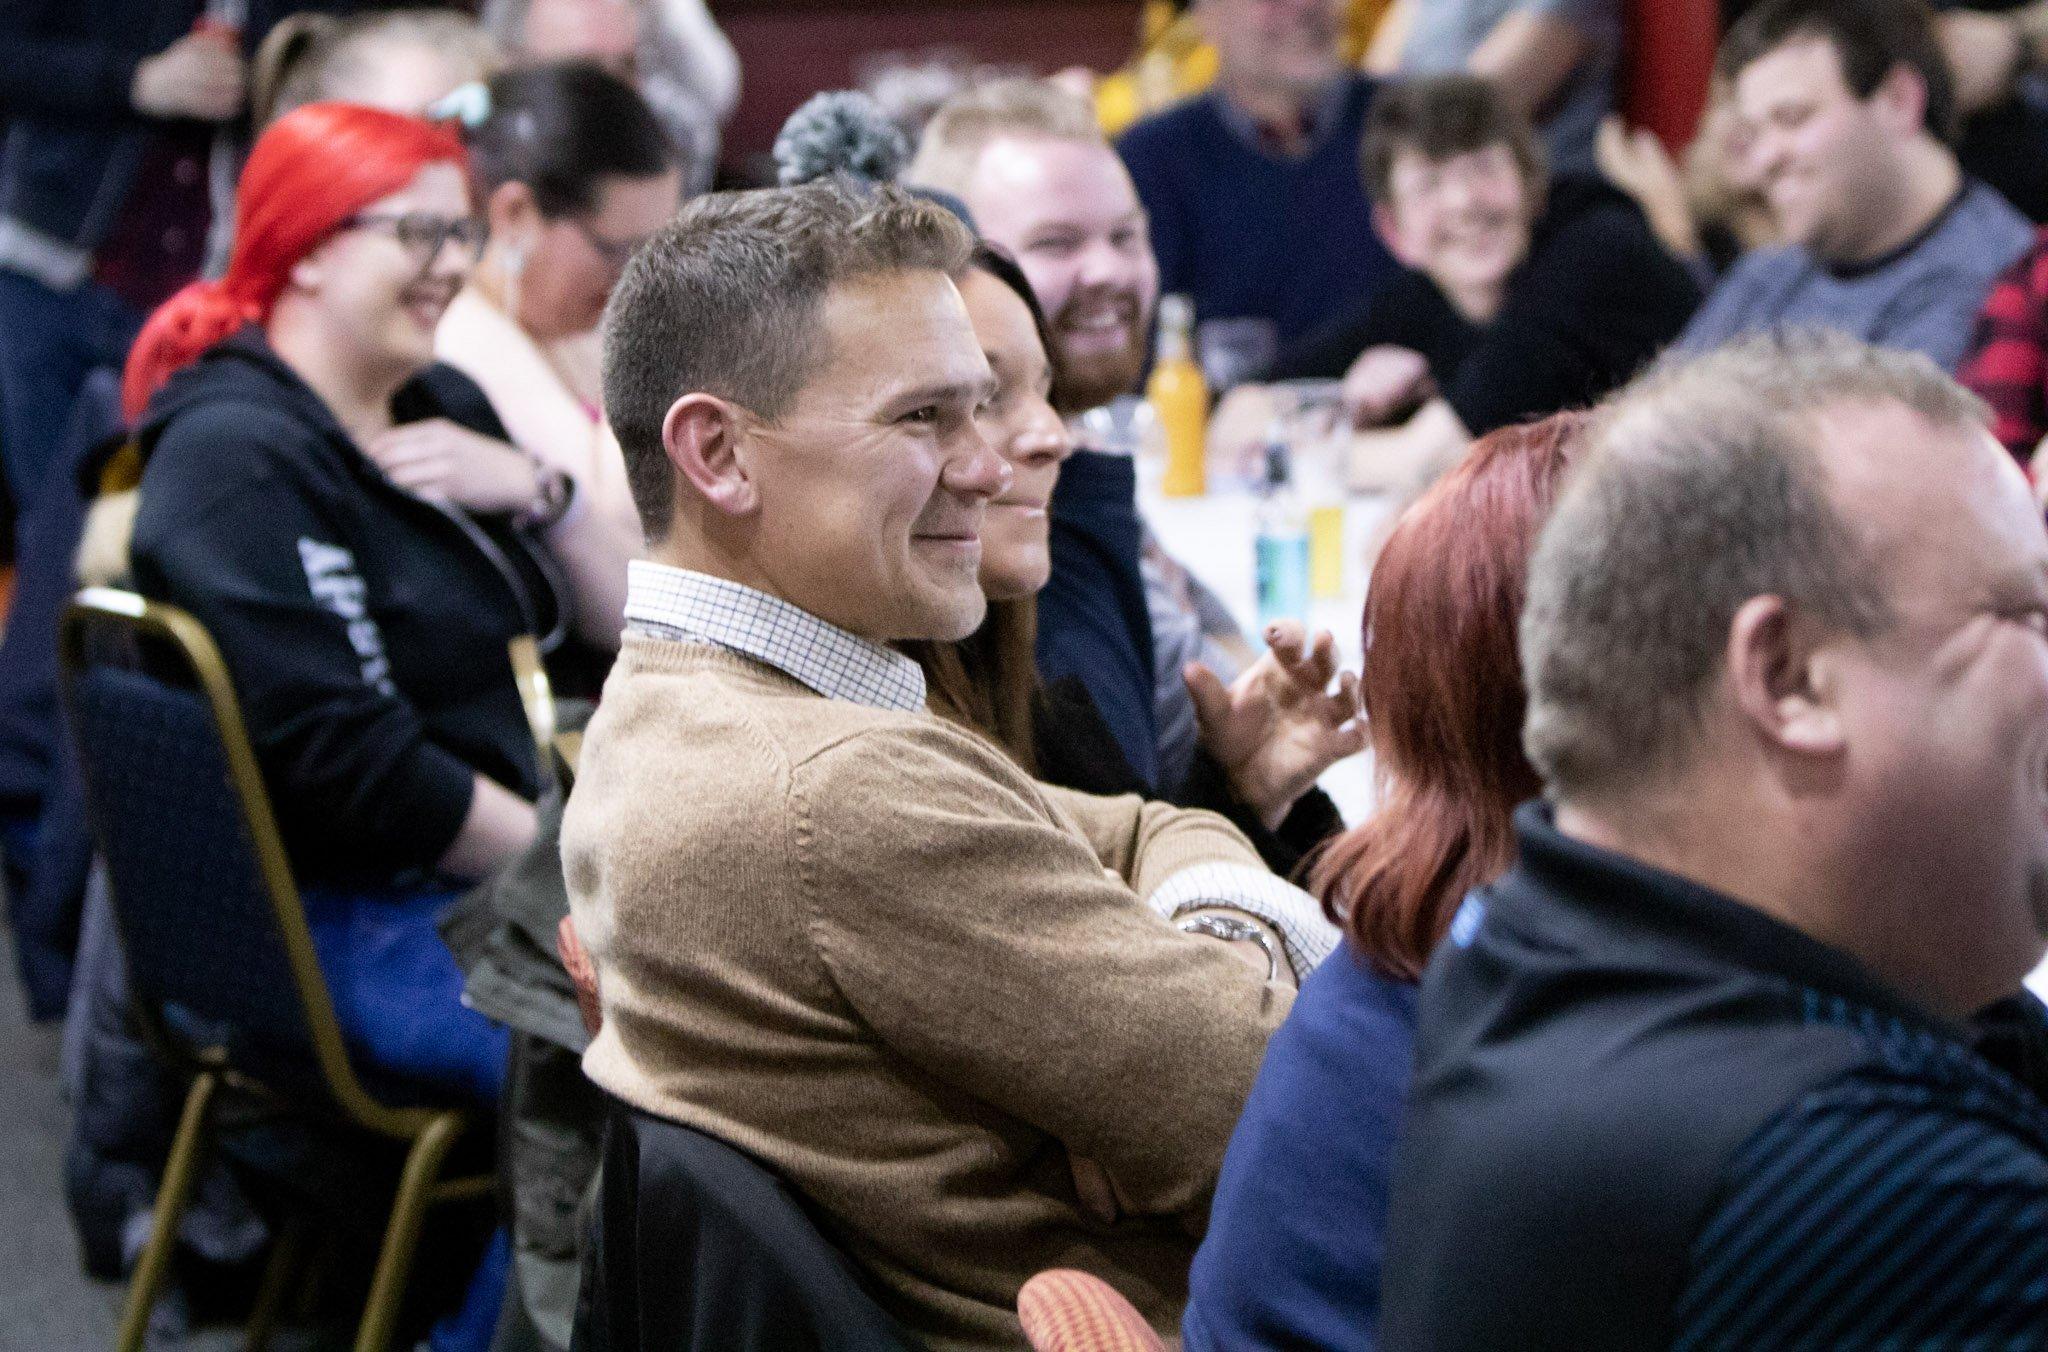 Fife Flyers Hockey Show, organised with the Fife Free Press - Todd Dutiaume in the crowd (Pic: Derek Young)